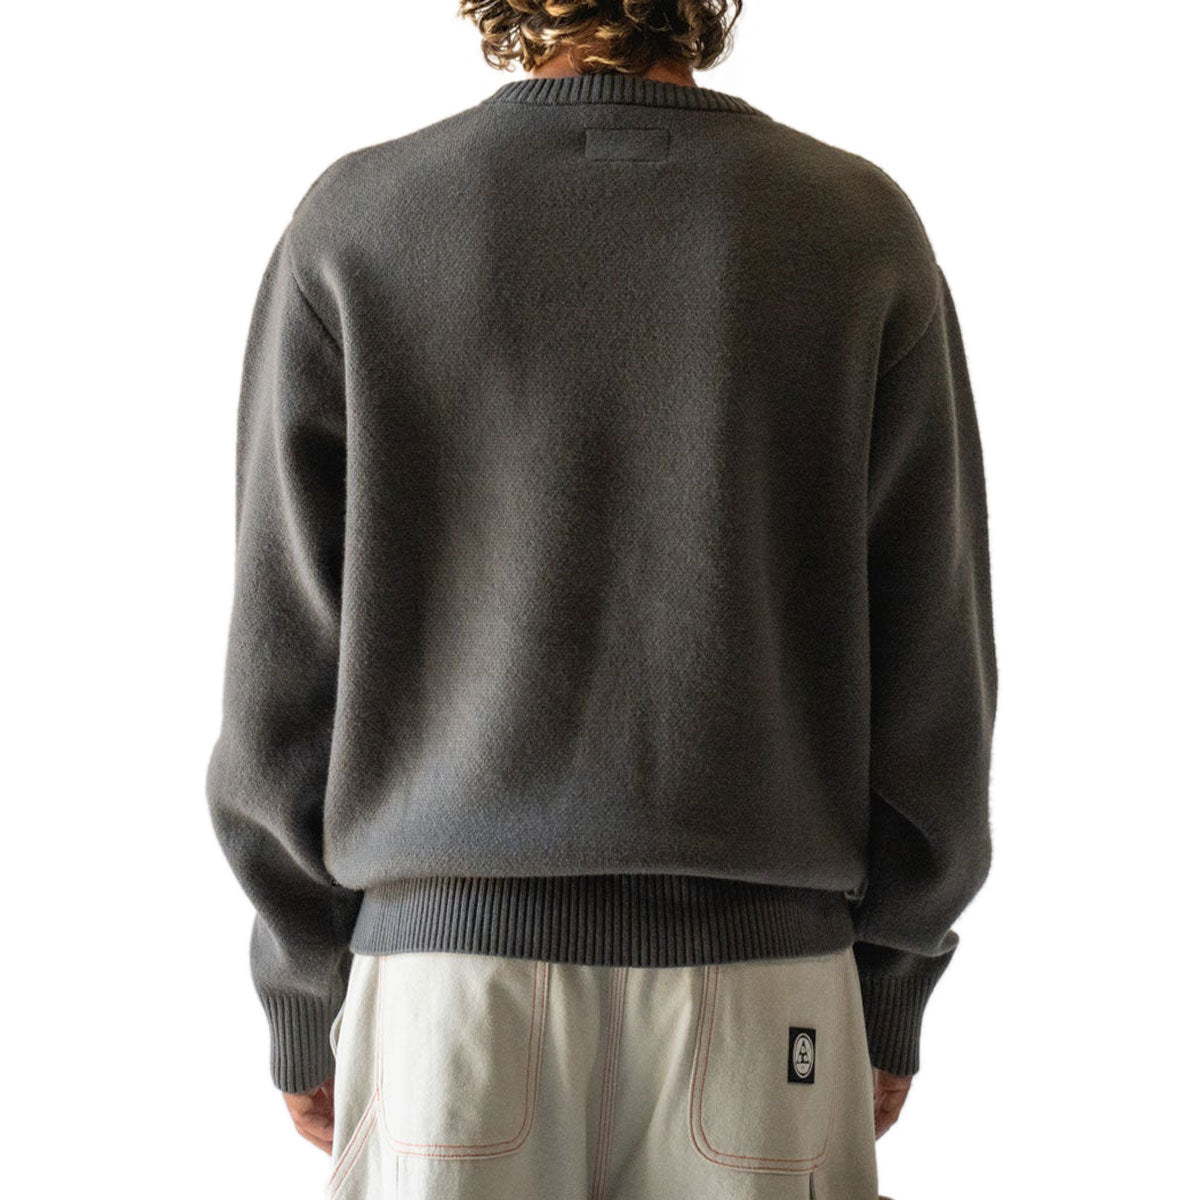 Welcome Nephilim Knit Sweater - Grey image 3